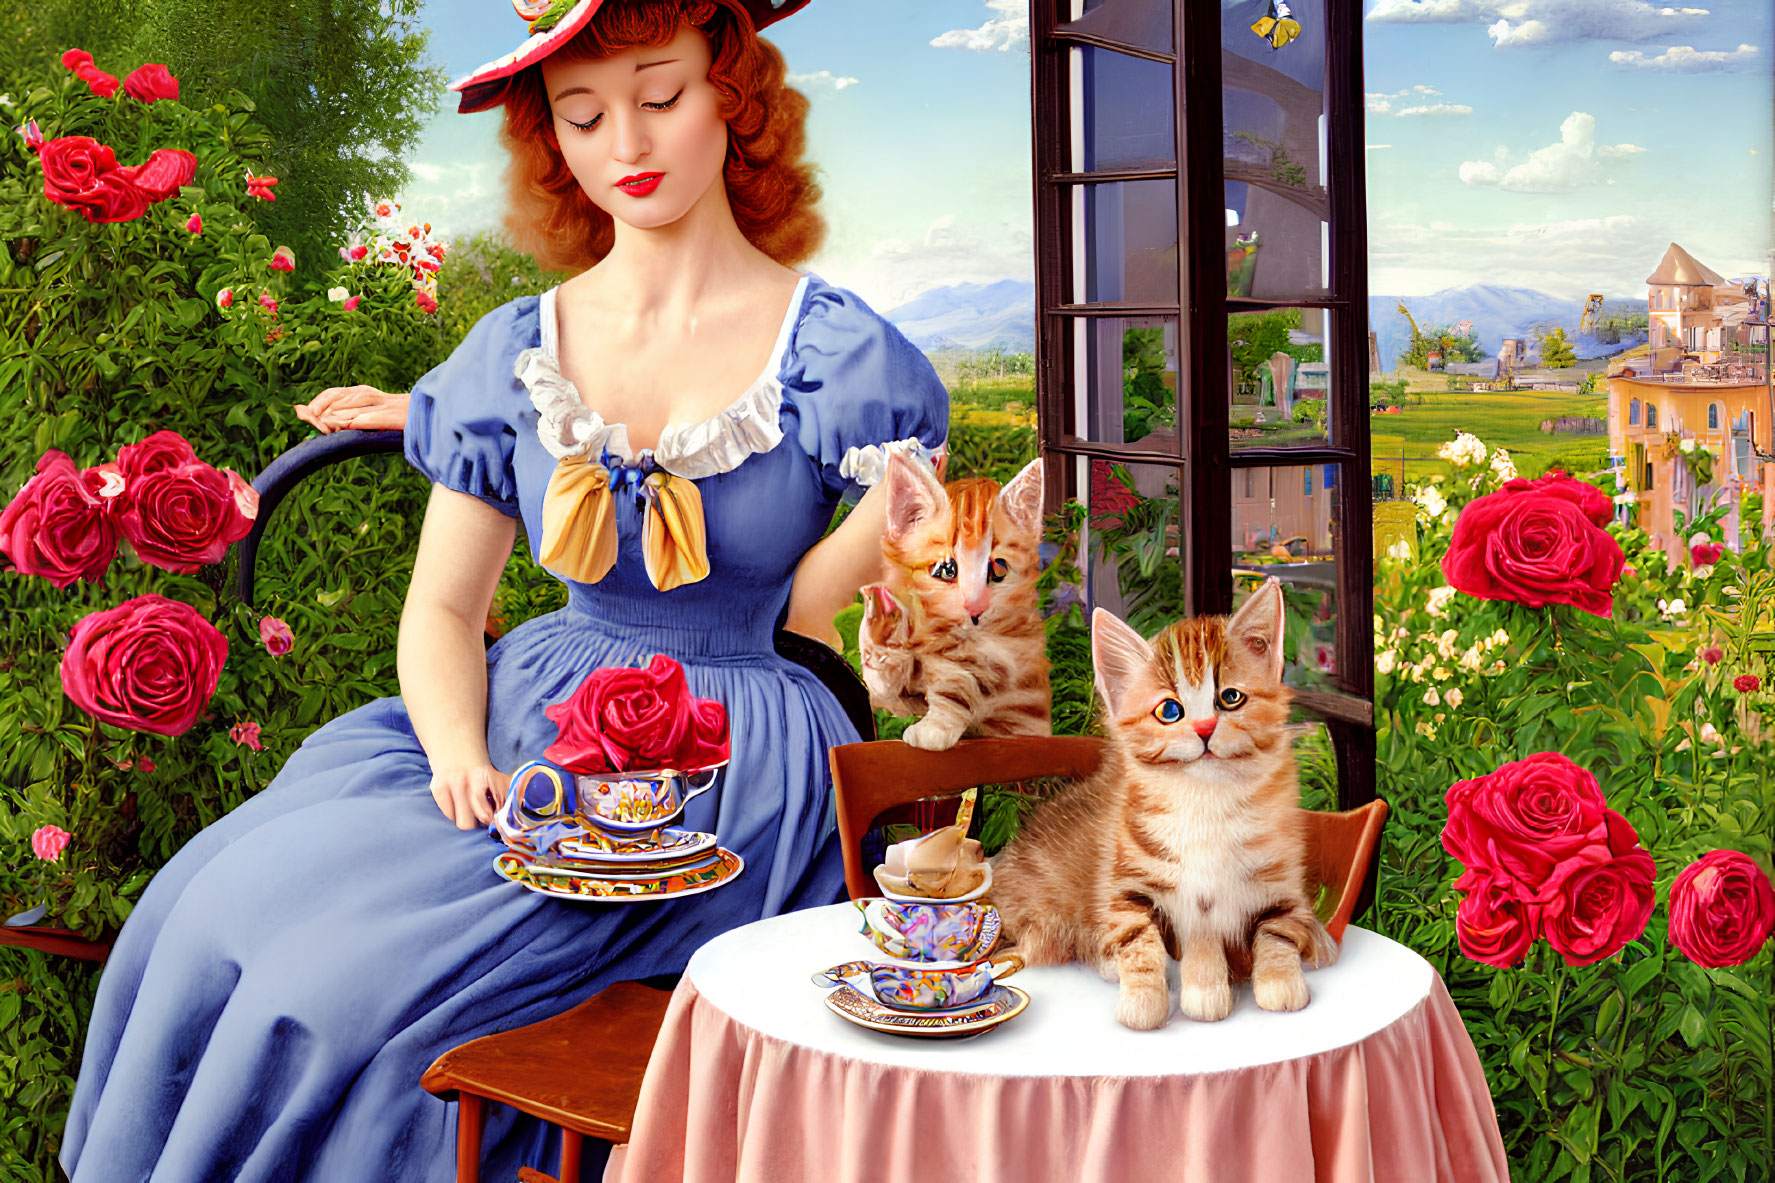 Vintage-style illustration of woman in blue dress with tea, kittens, and roses in pastoral scene